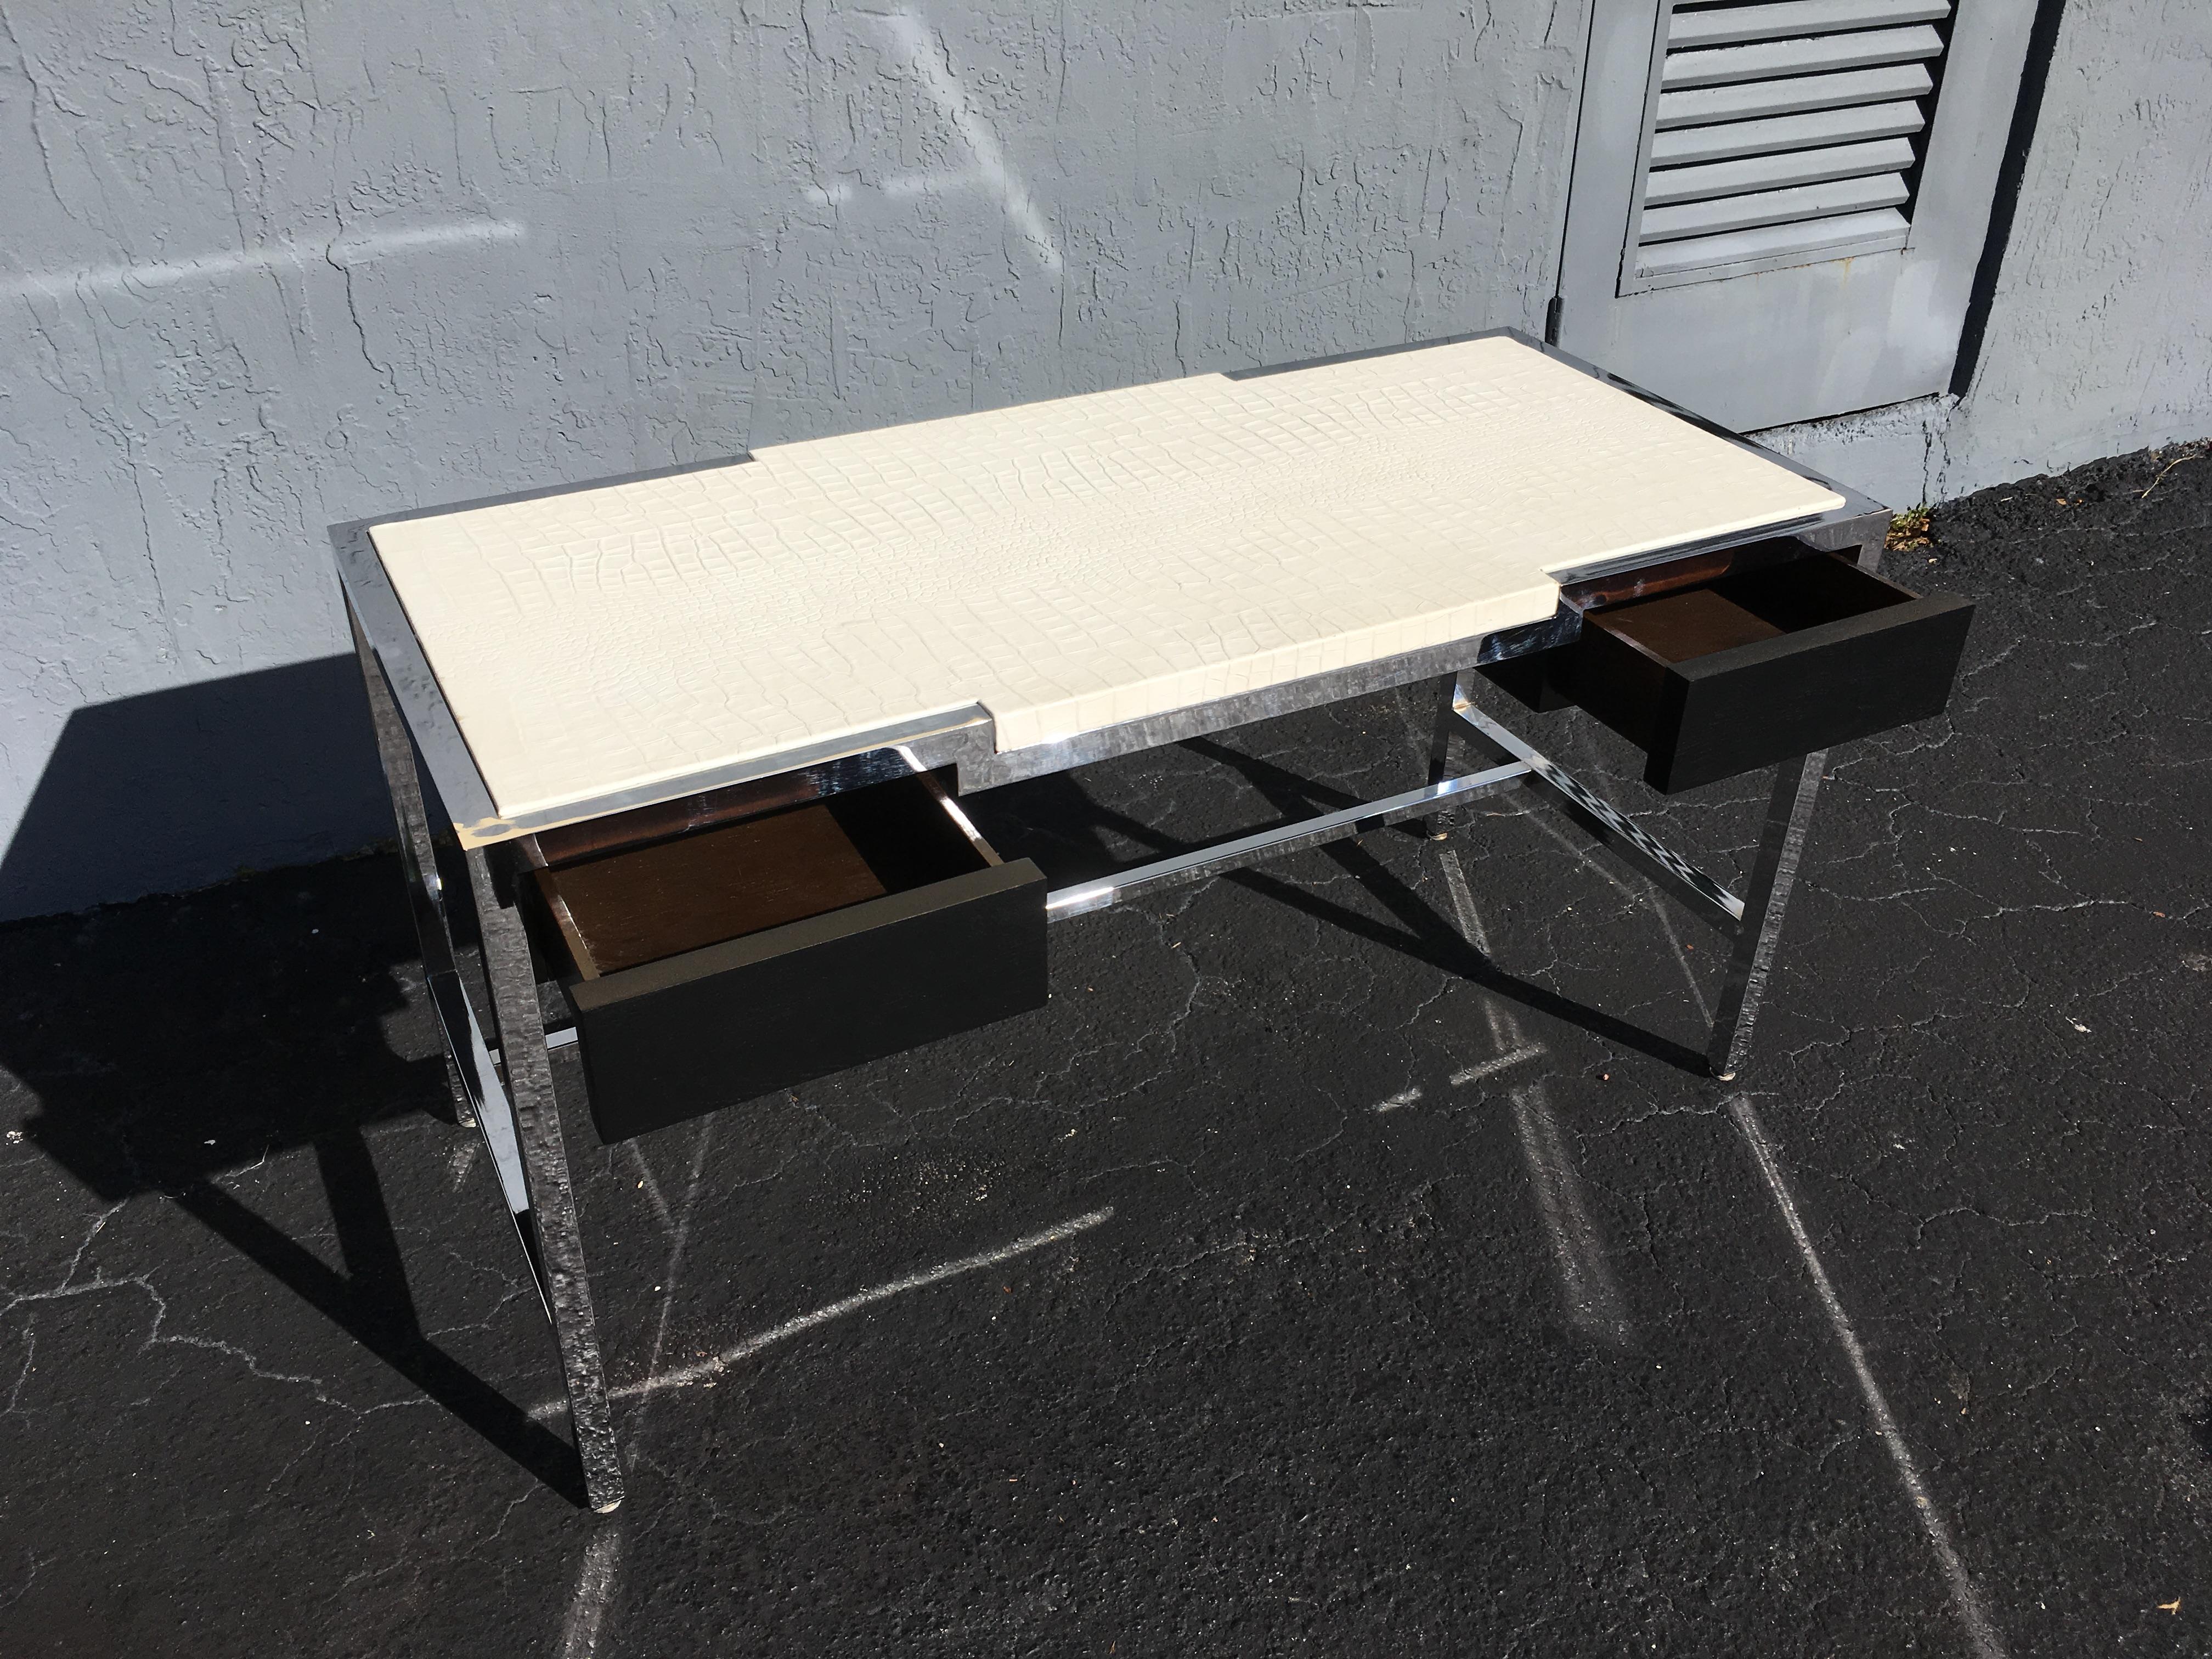 Midcentury Chrome Desk with Alligator Leather Top by Century 4